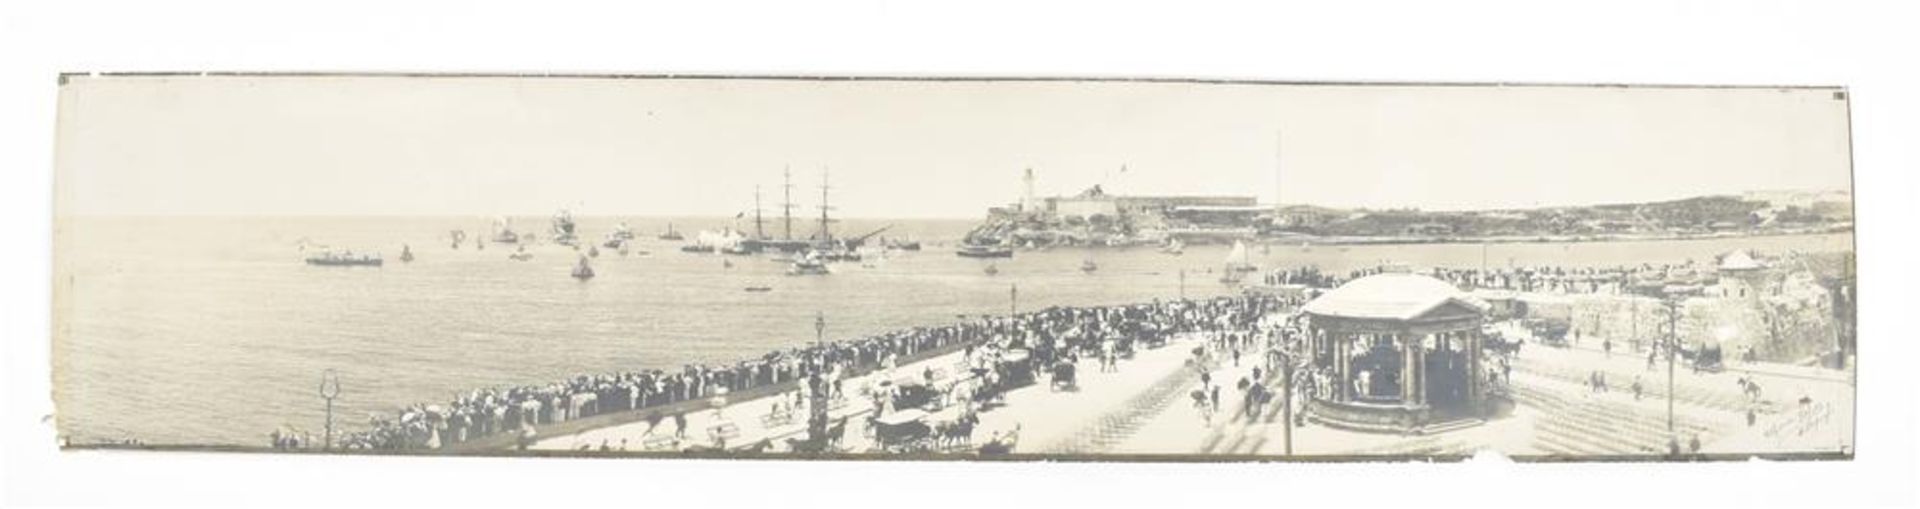 Lopez, A. Panoramic view of Valetta Harbour, Malta